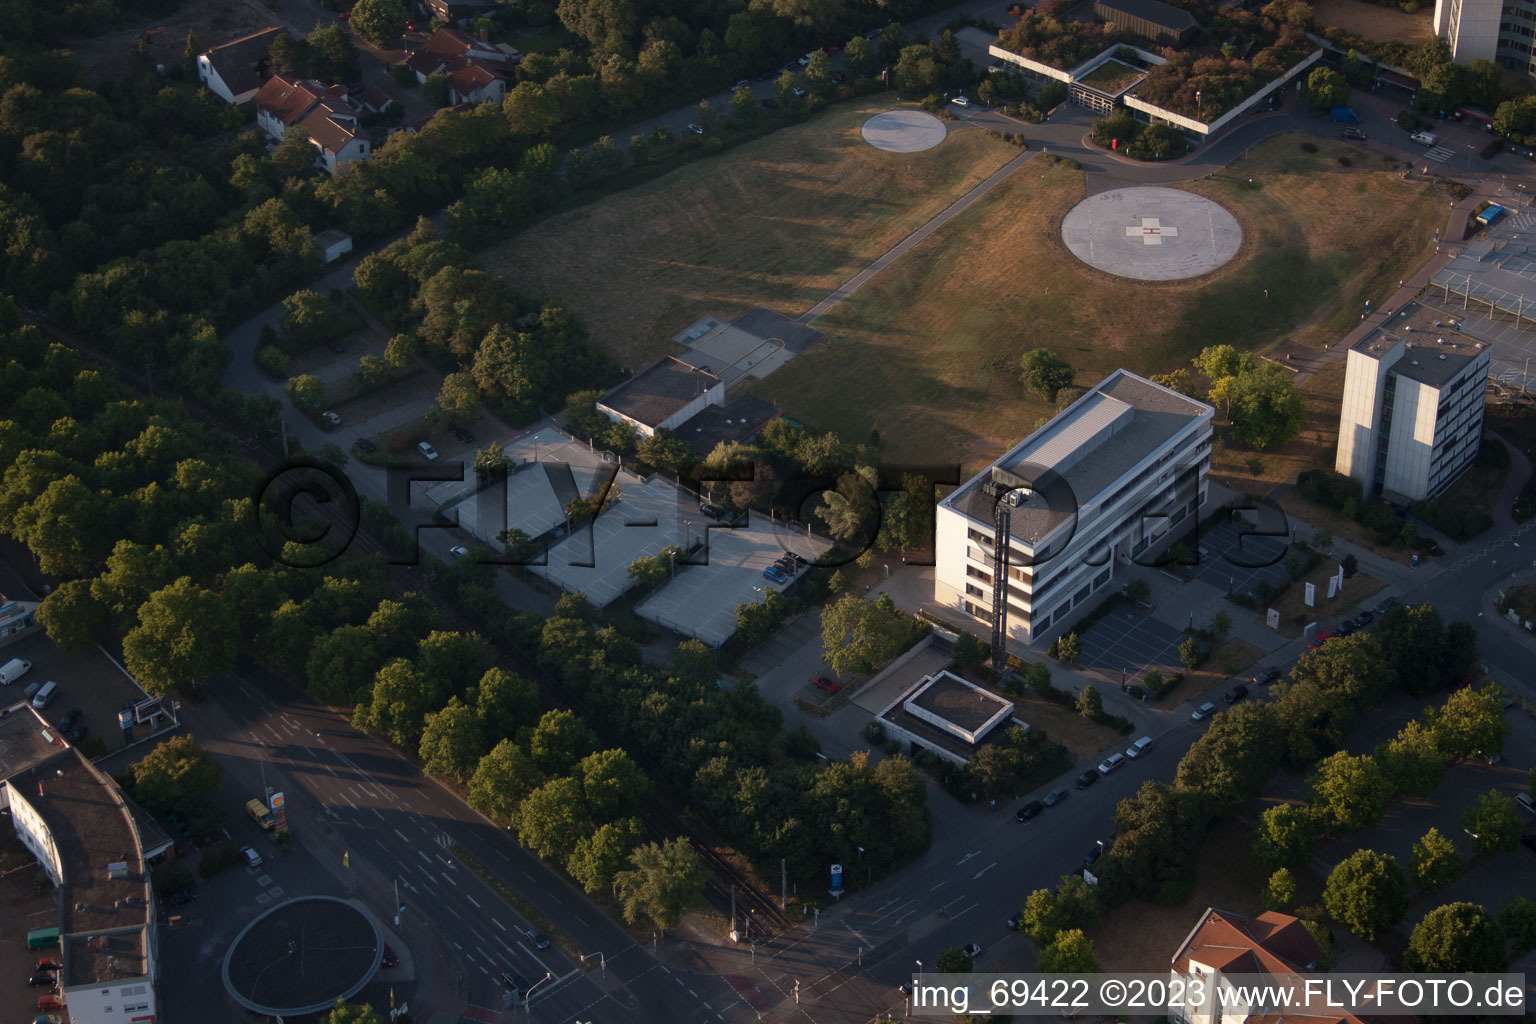 District Oggersheim in Ludwigshafen am Rhein in the state Rhineland-Palatinate, Germany from the drone perspective